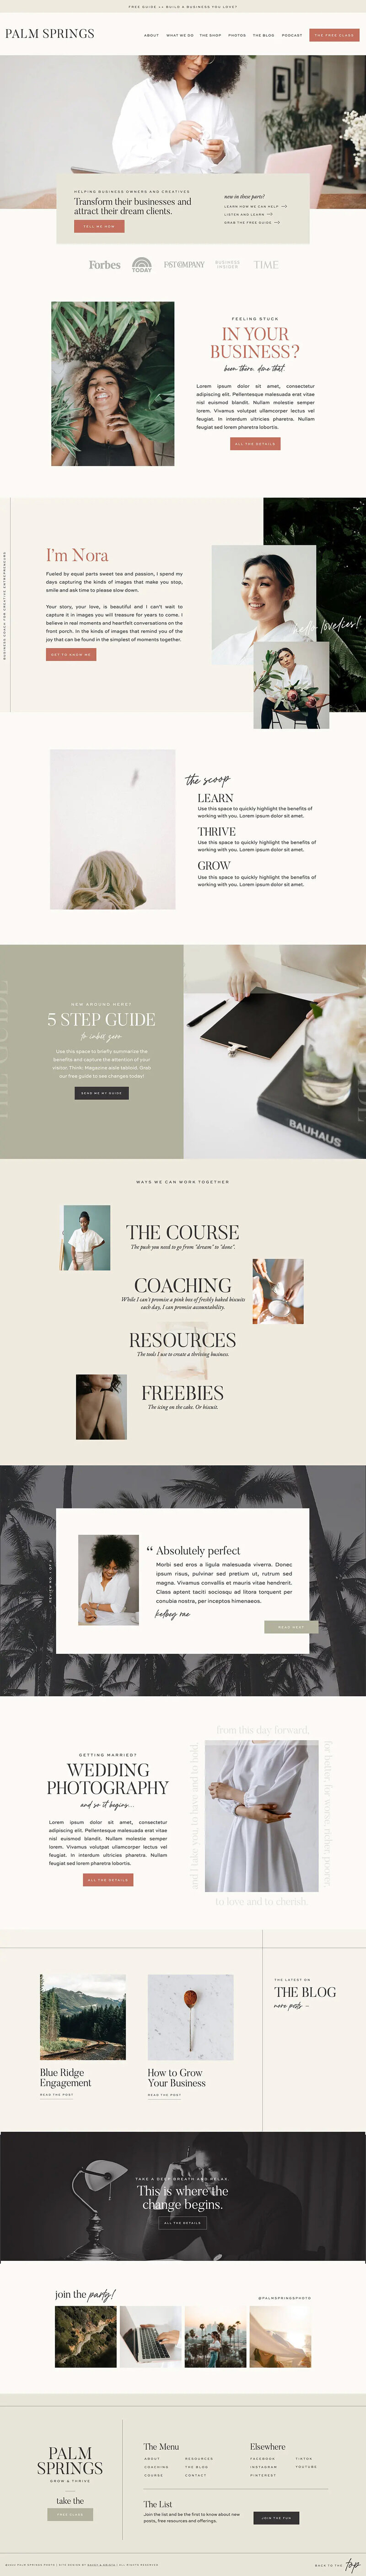 Palm Springs Free Showit Website Template